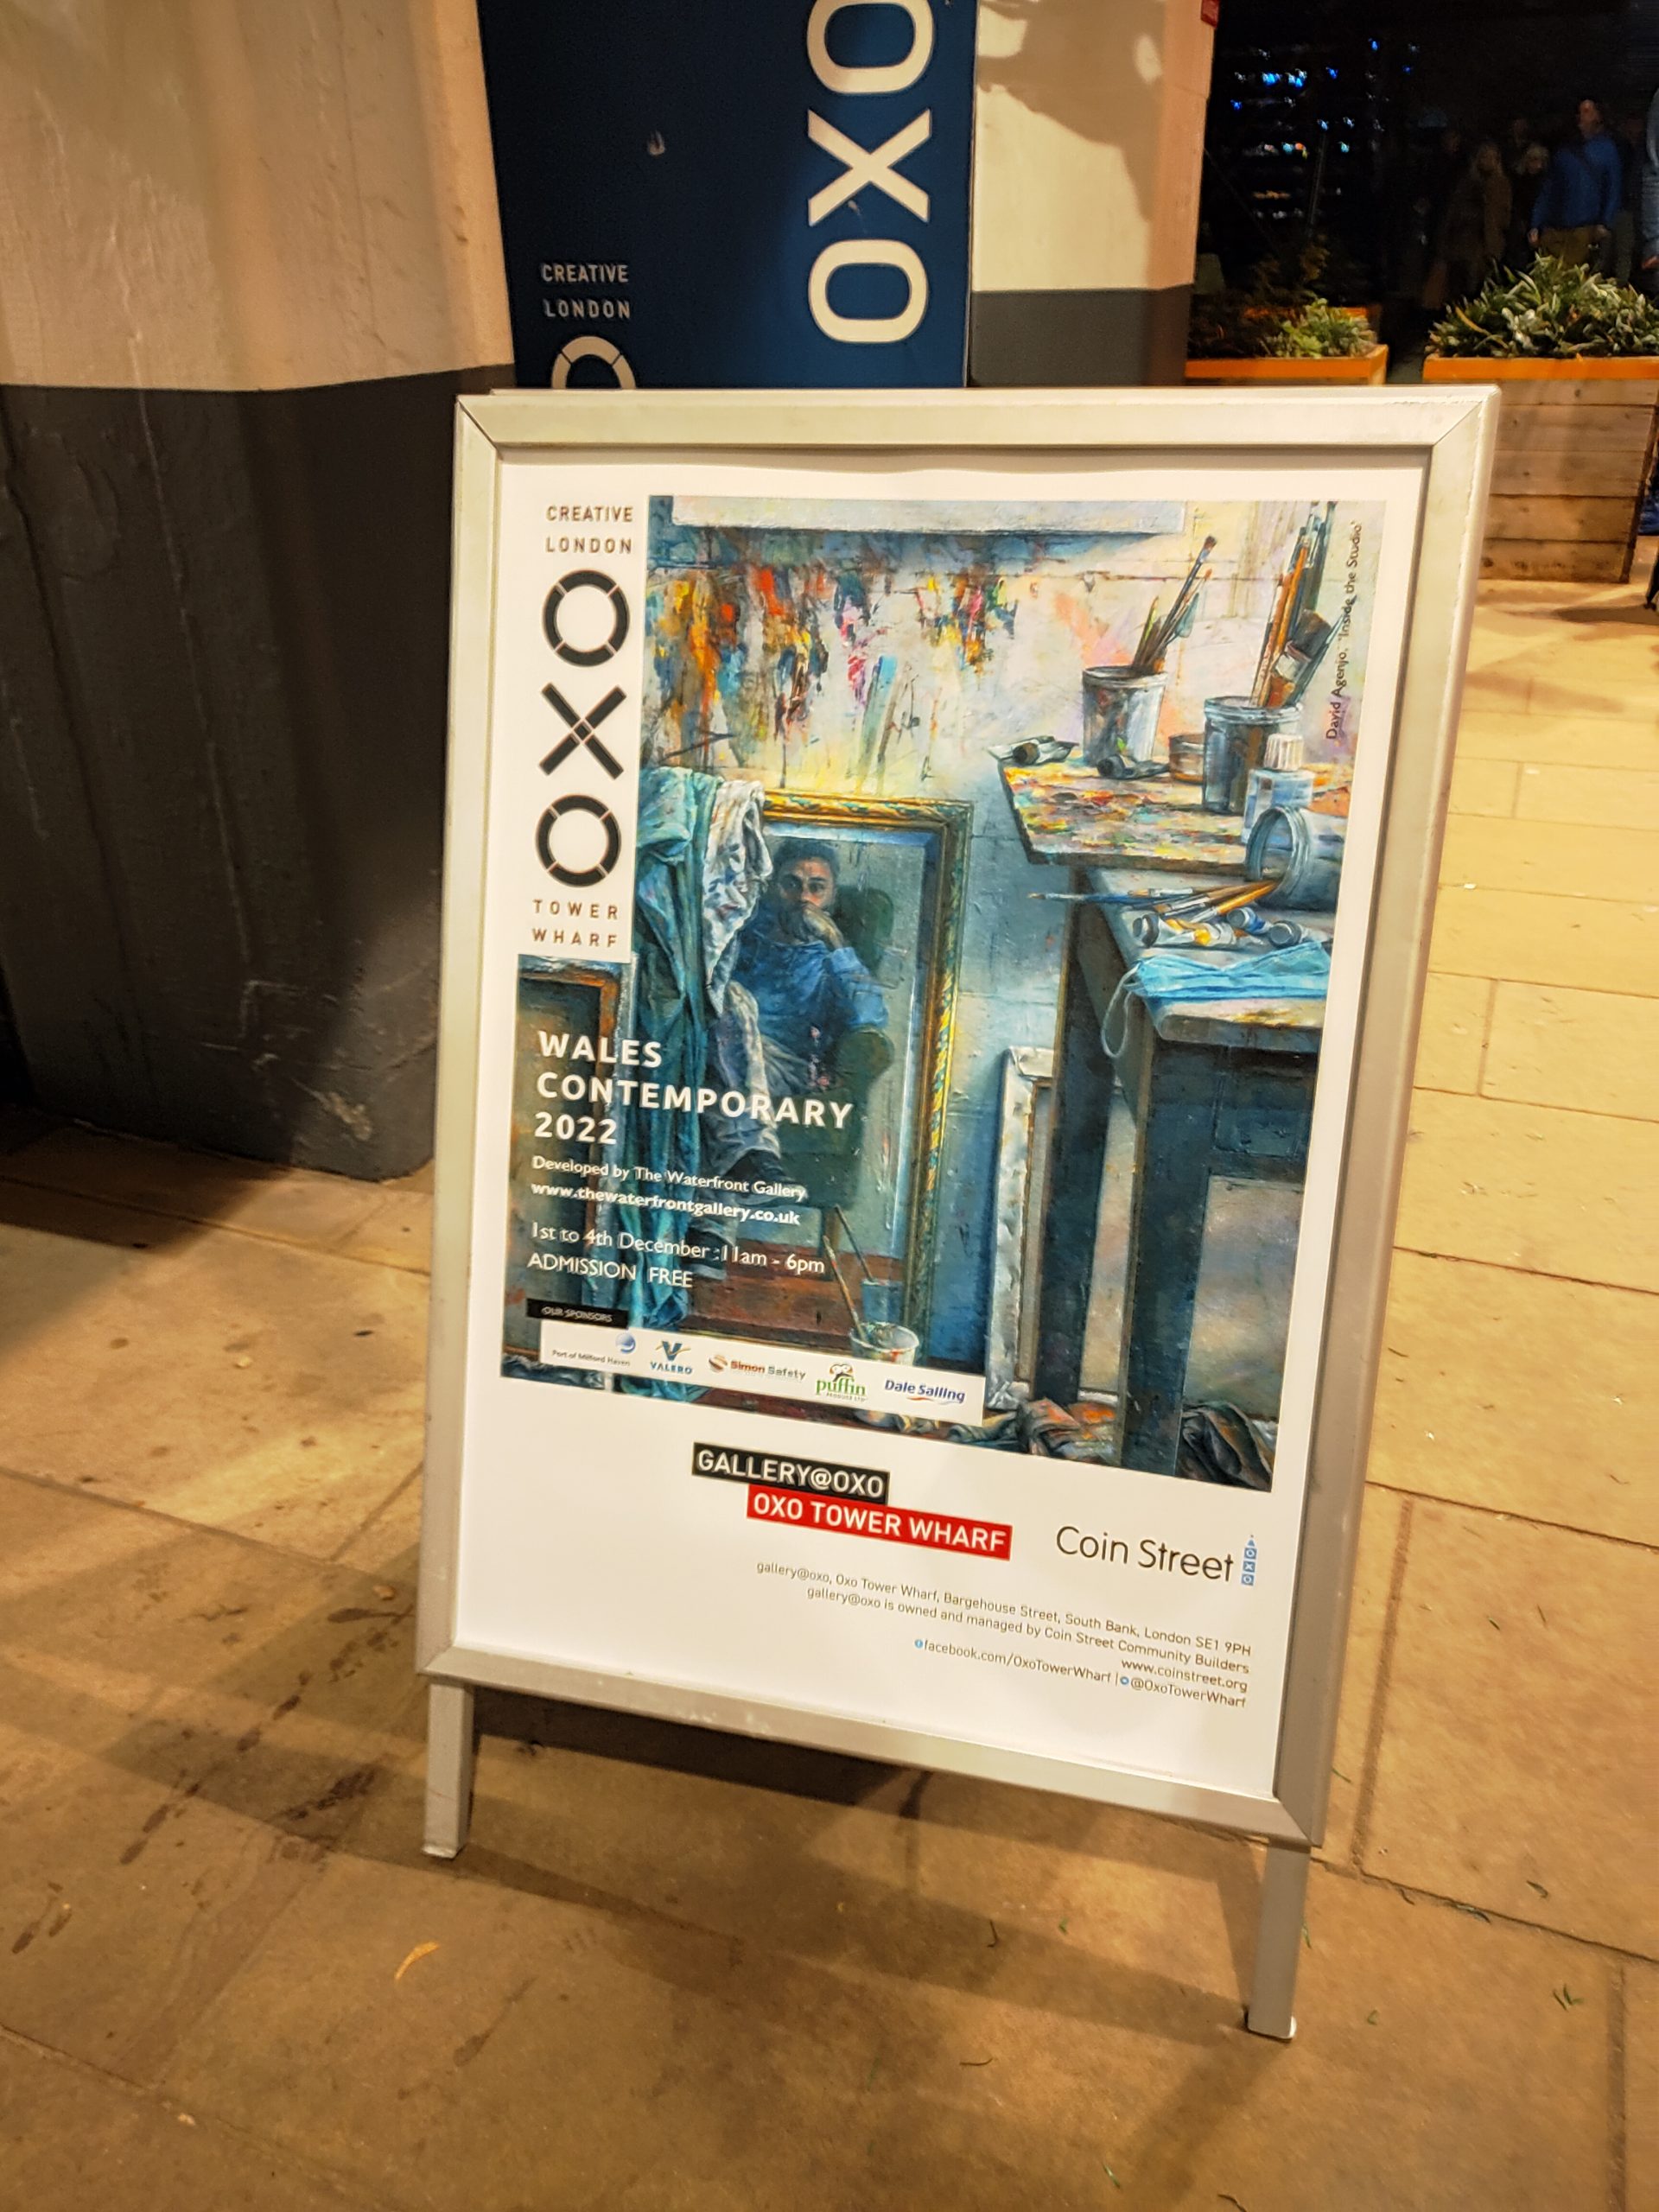 Wales Contemporary at Gallery@OXO